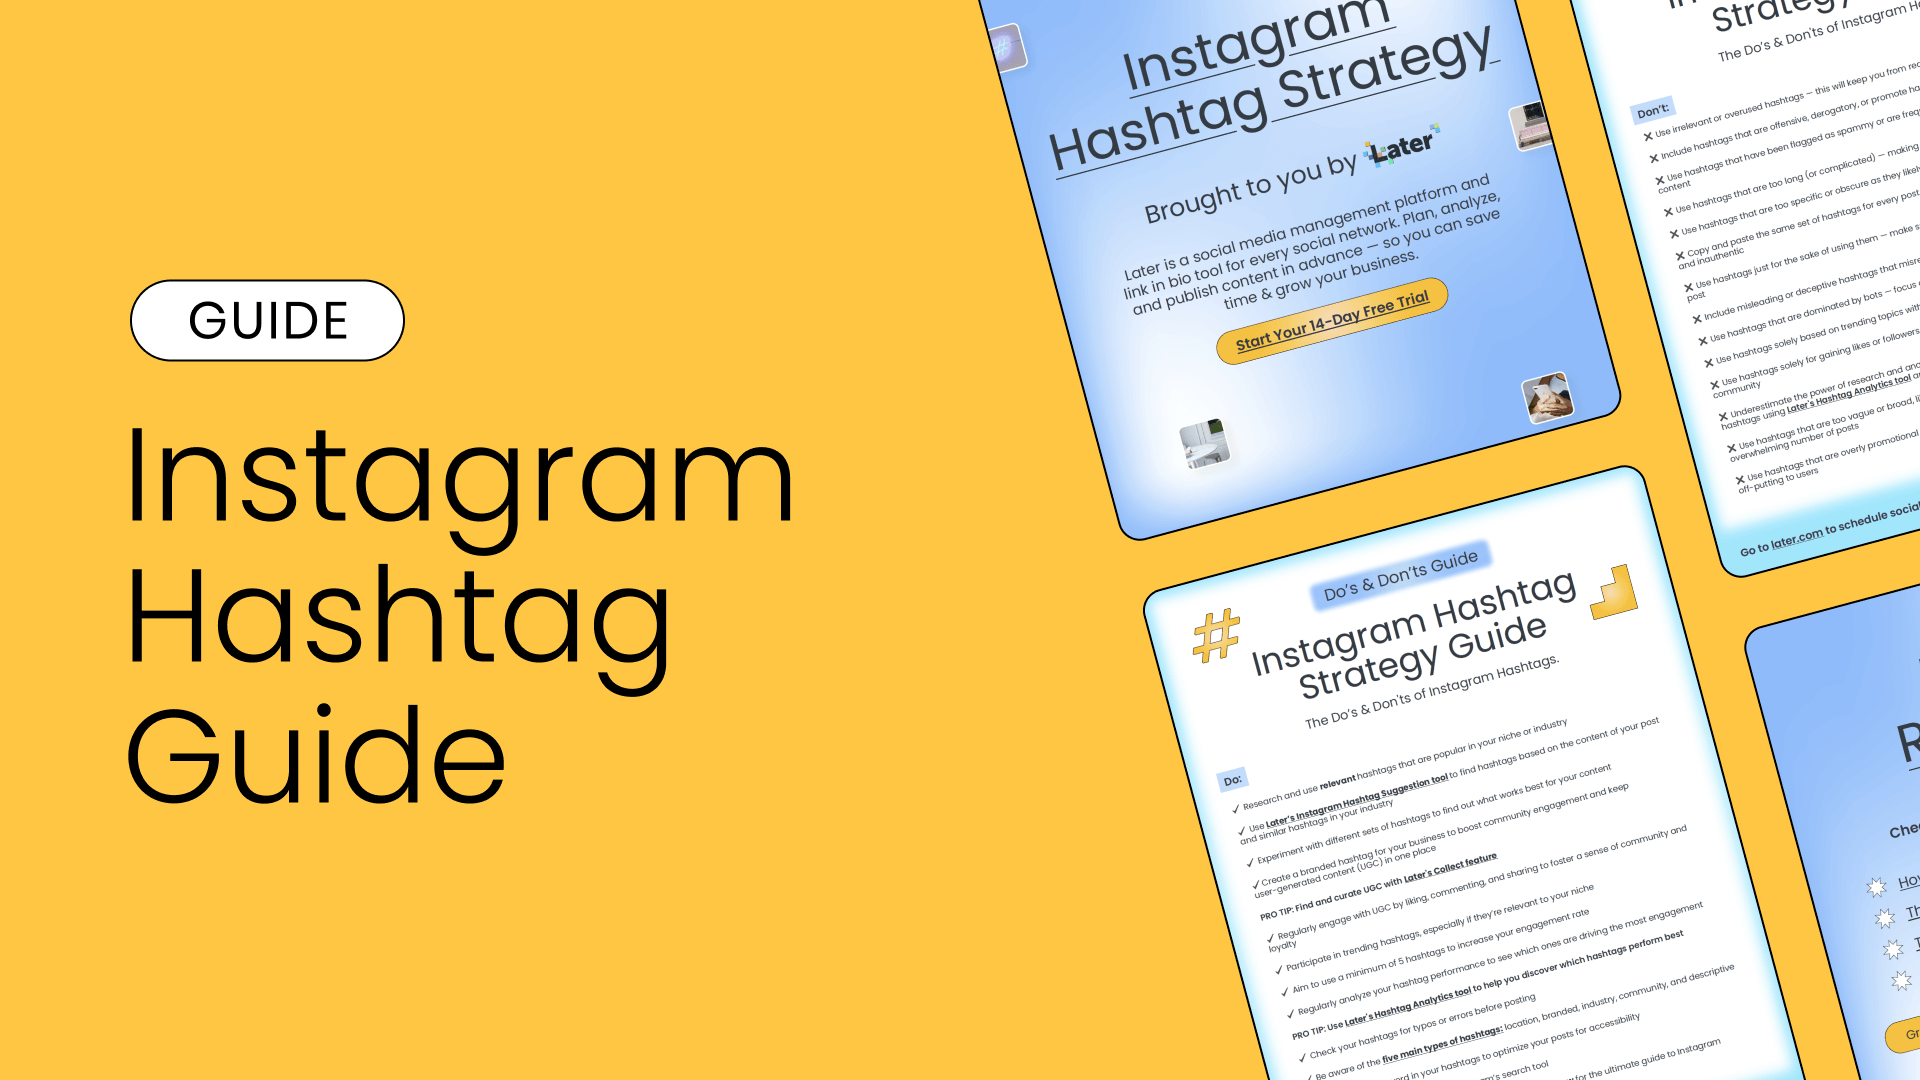 Decorative header for the free downloadable Instagram hashtag strategy guide from Later.